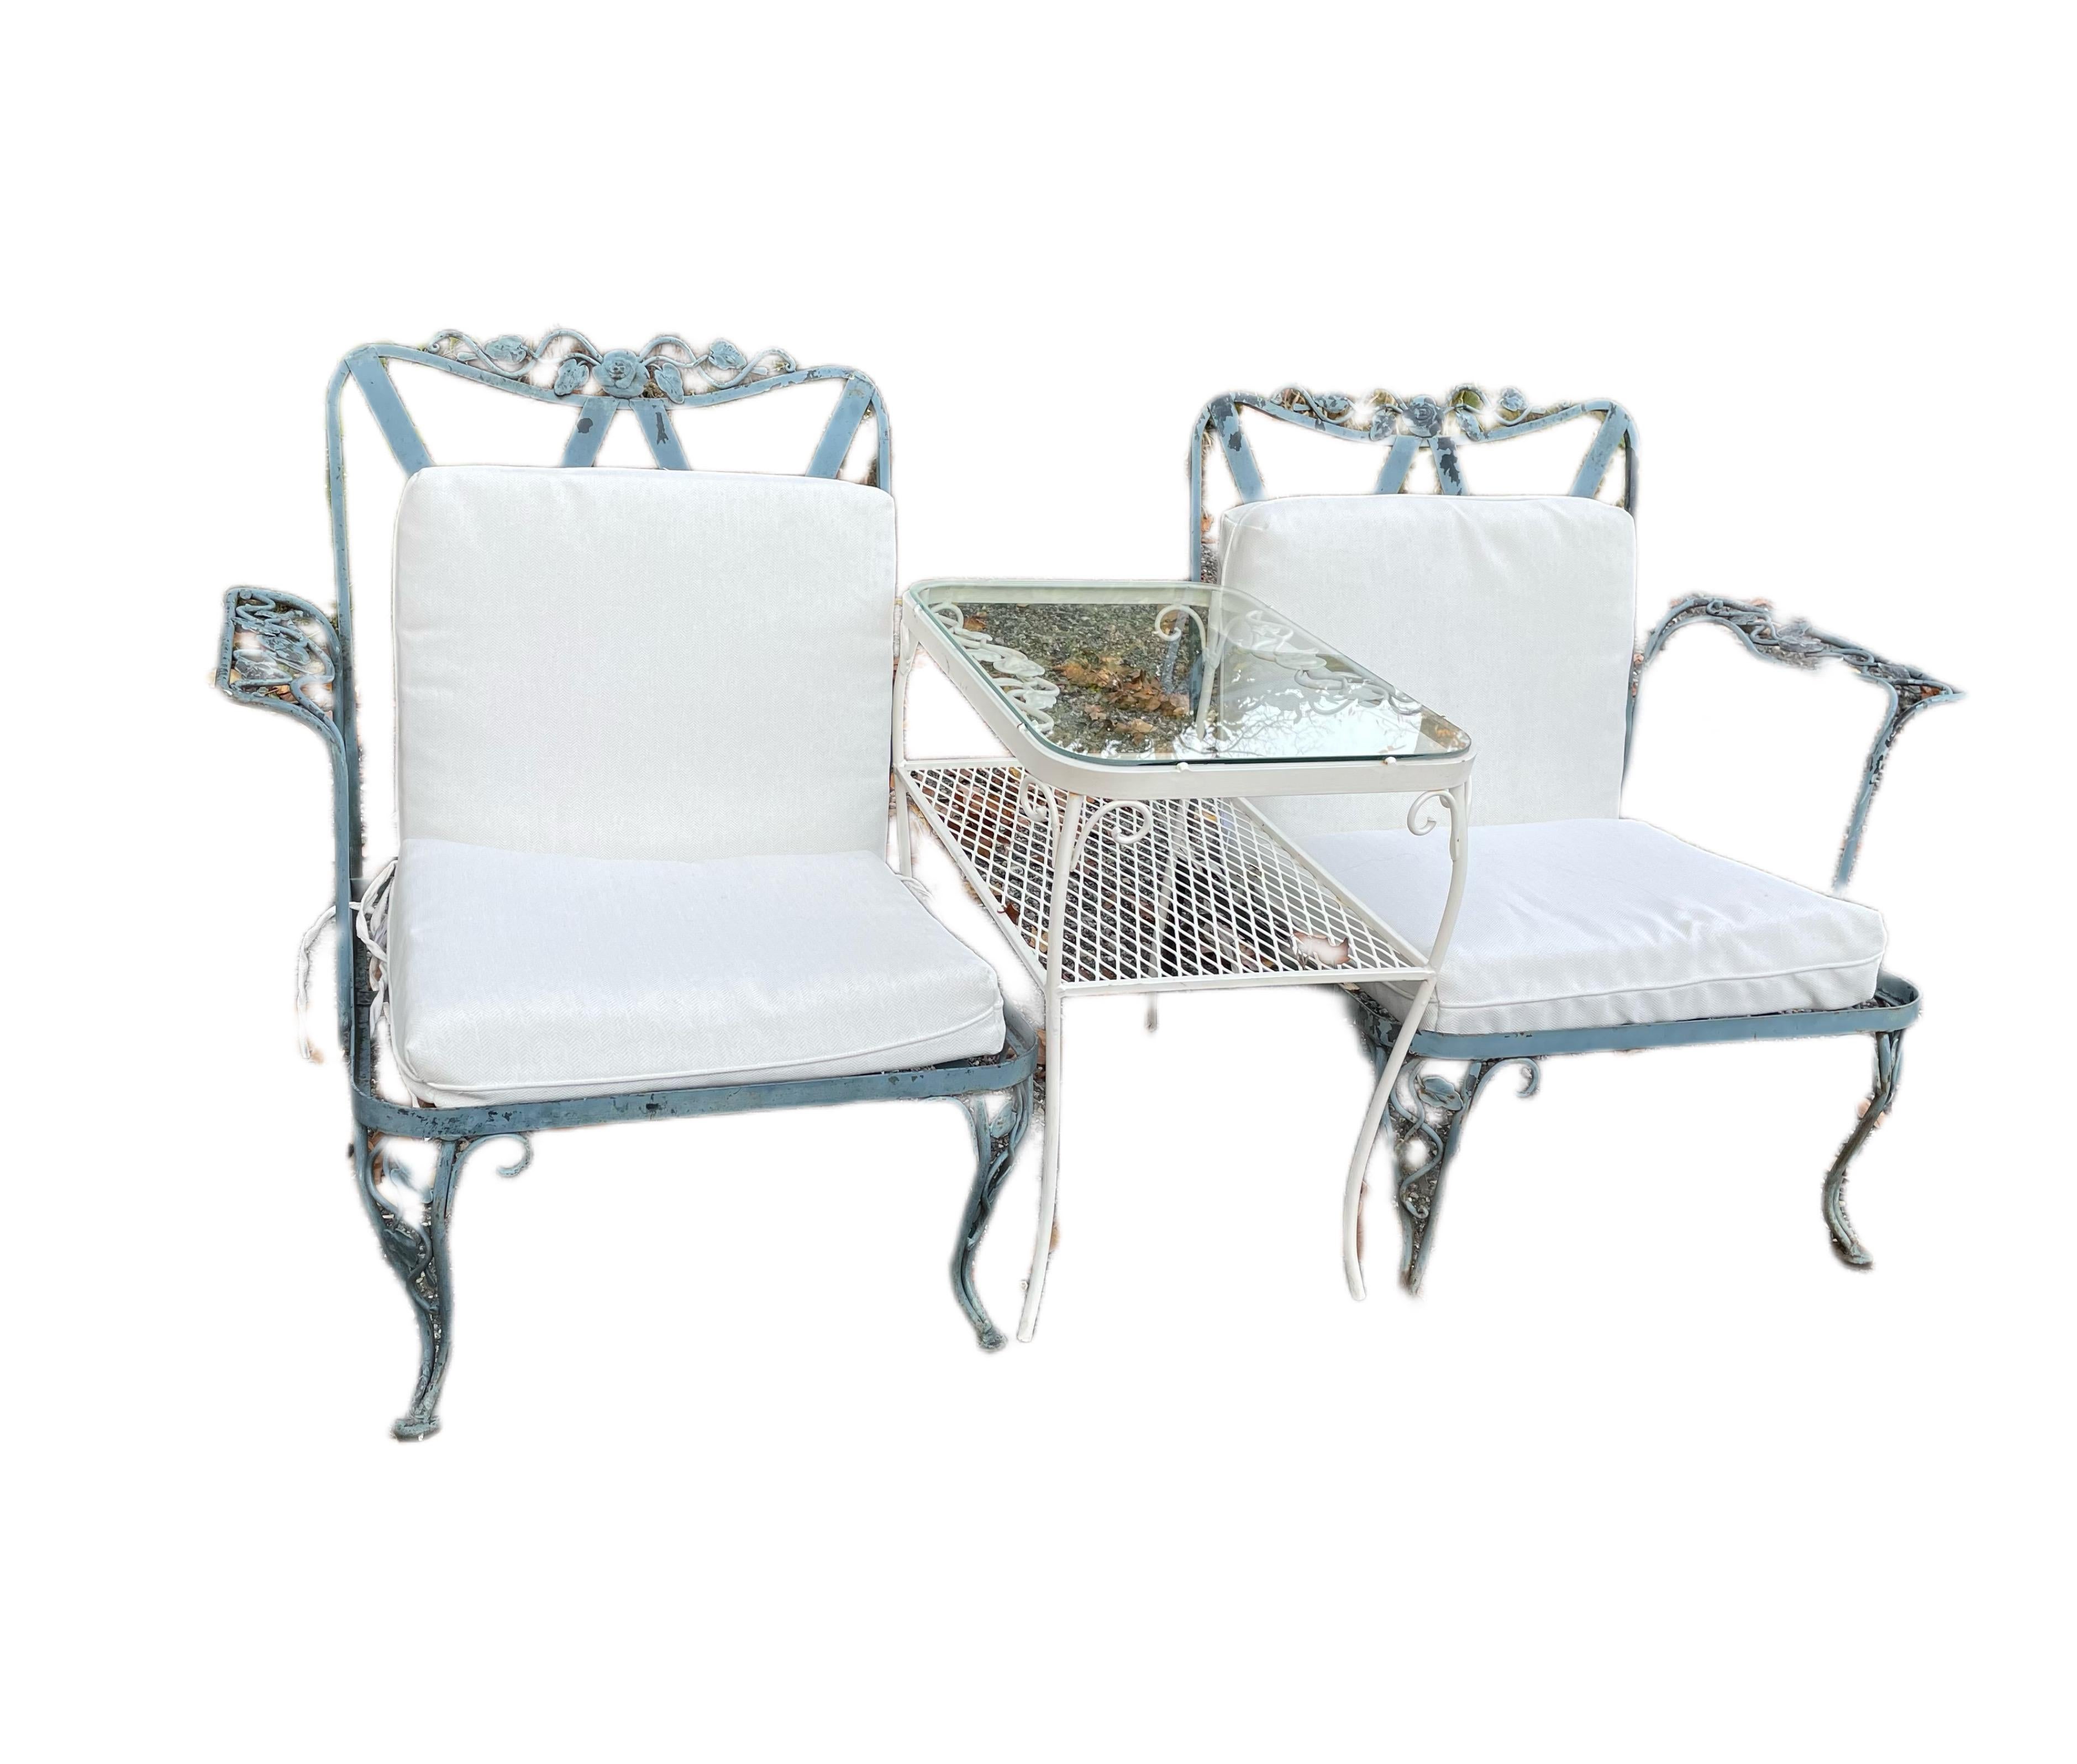 Vintage wrought iron woodard Chantilly rose Tete-a-Tete Style loveseat.

In stock and ready to ship for your enjoyment is this versatile loveseat and table arrangement made by Russell Woodard and of the highly sought after and most desirable